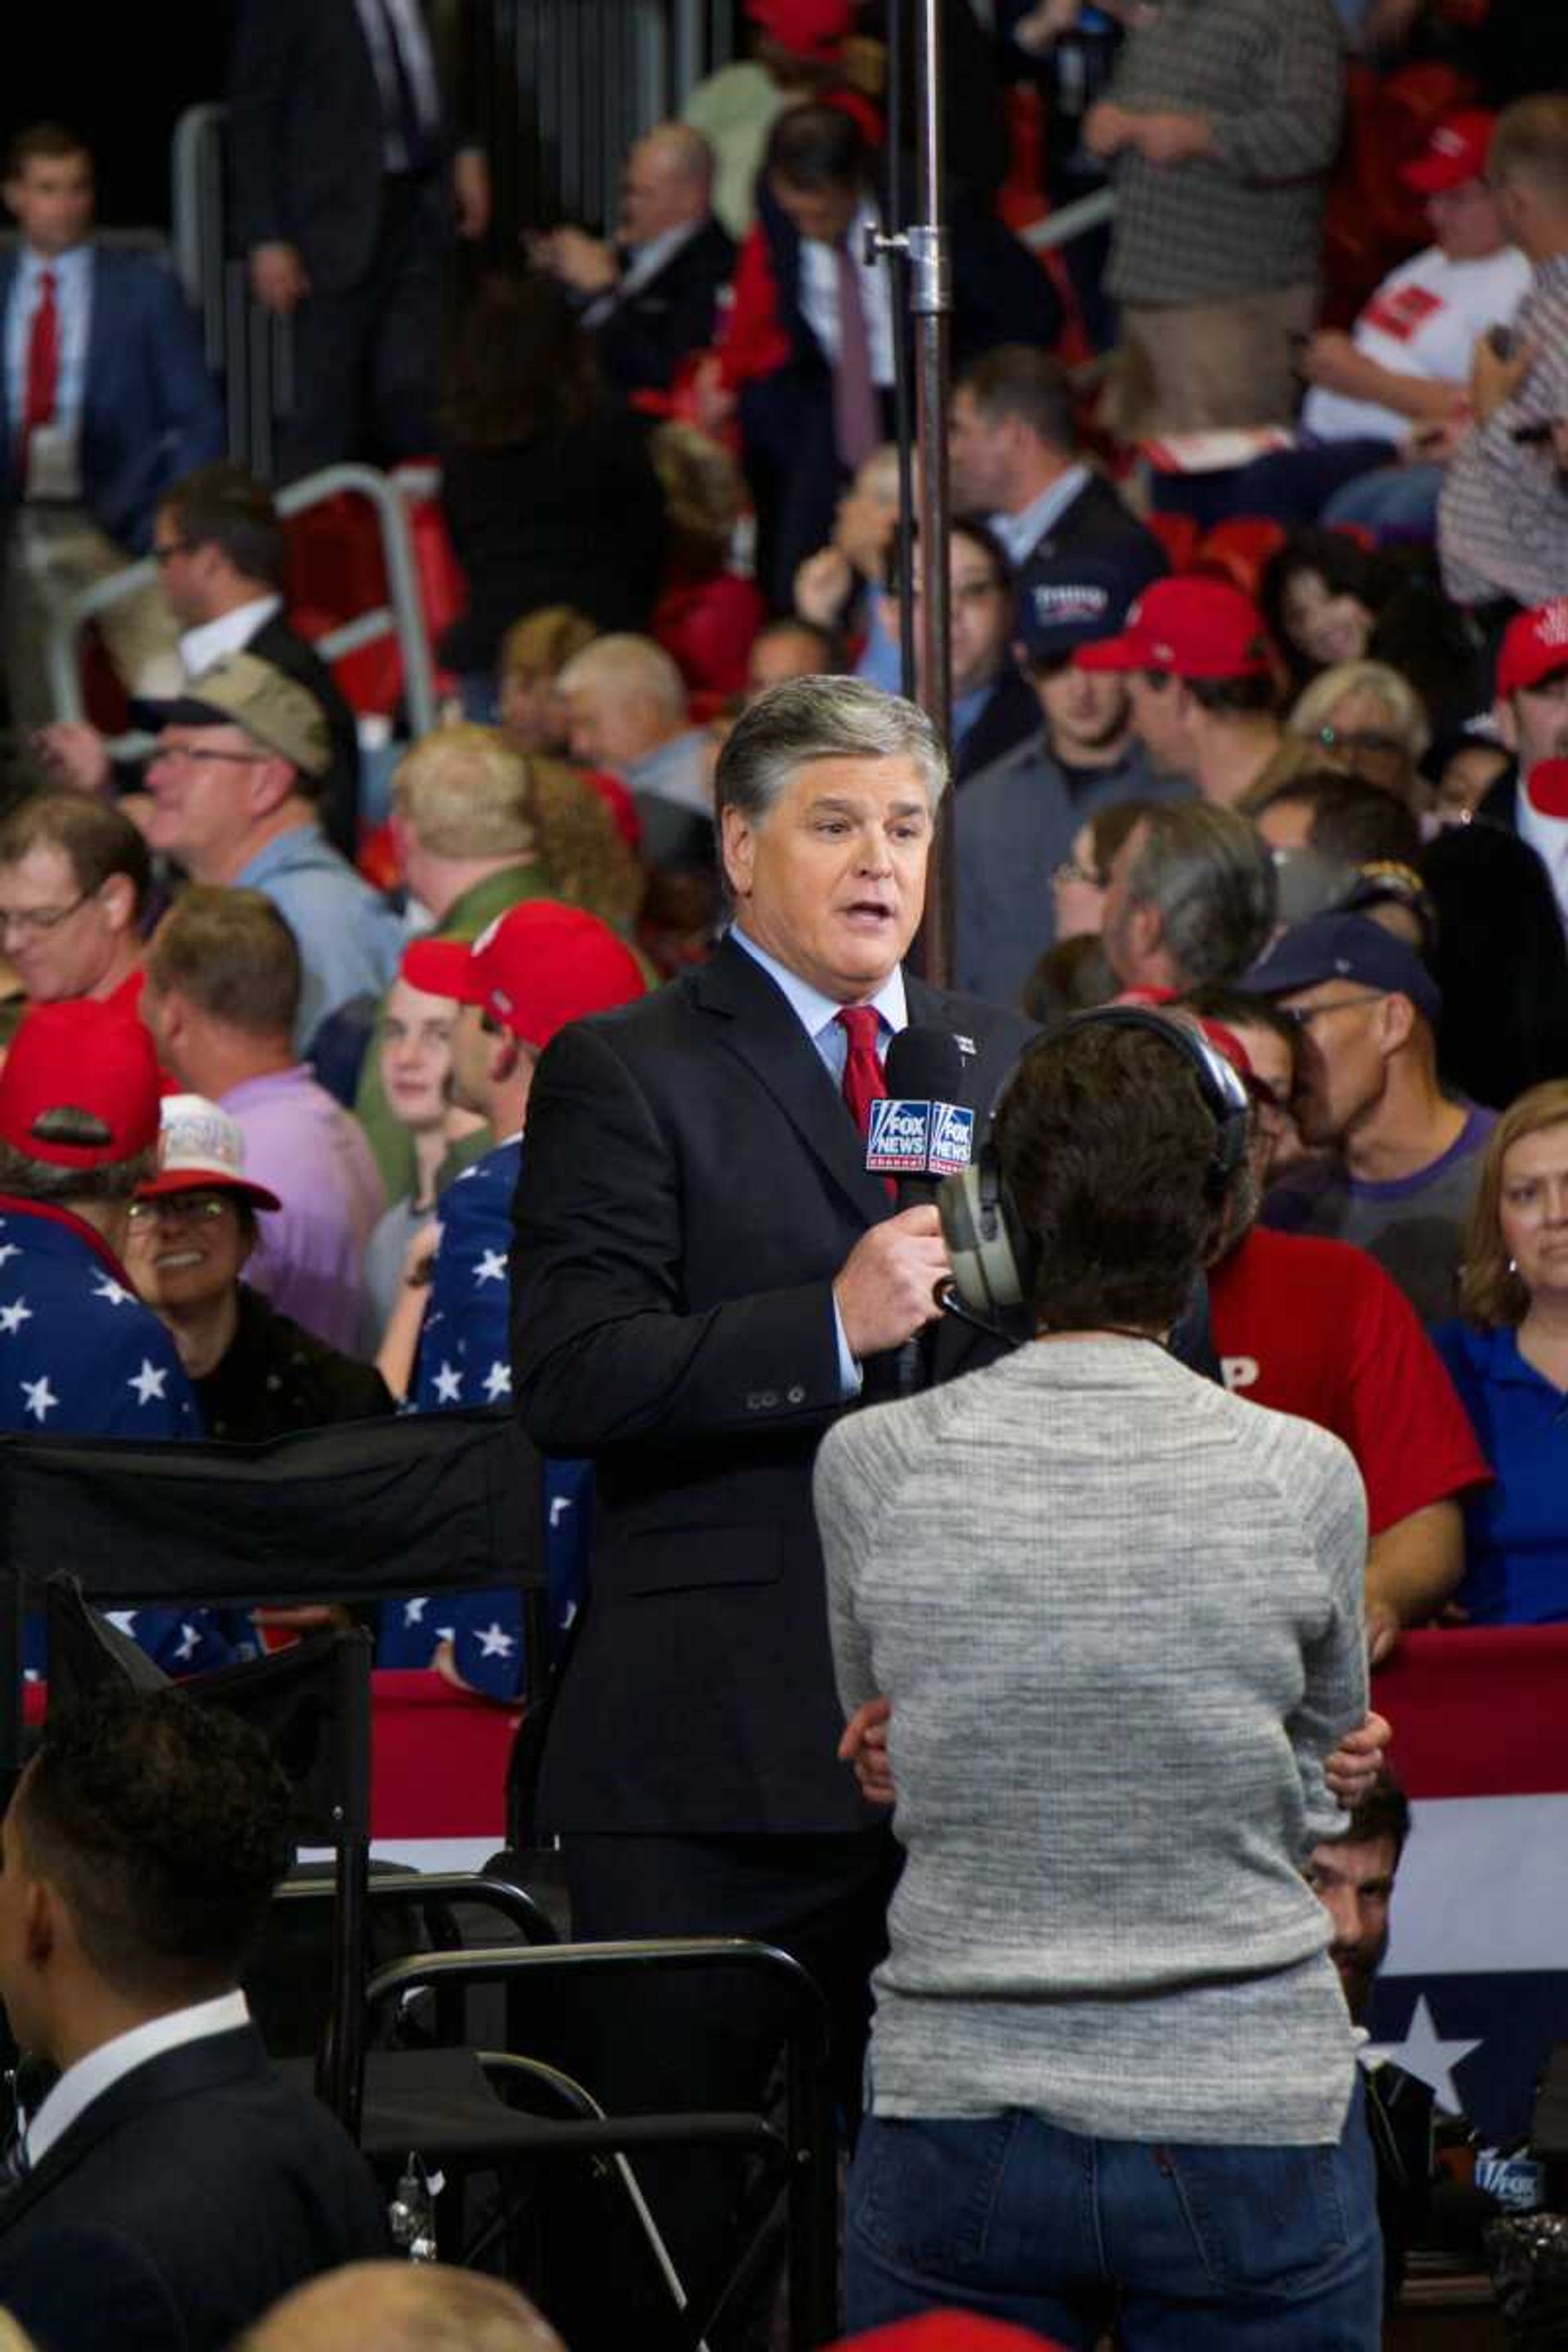 Conservative TV and radio personality Sean Hannity films his show near the edge of the crowd at President Trump's last MAGA rally of the Midterm Elections in Cape Girardeau Nov. 5.